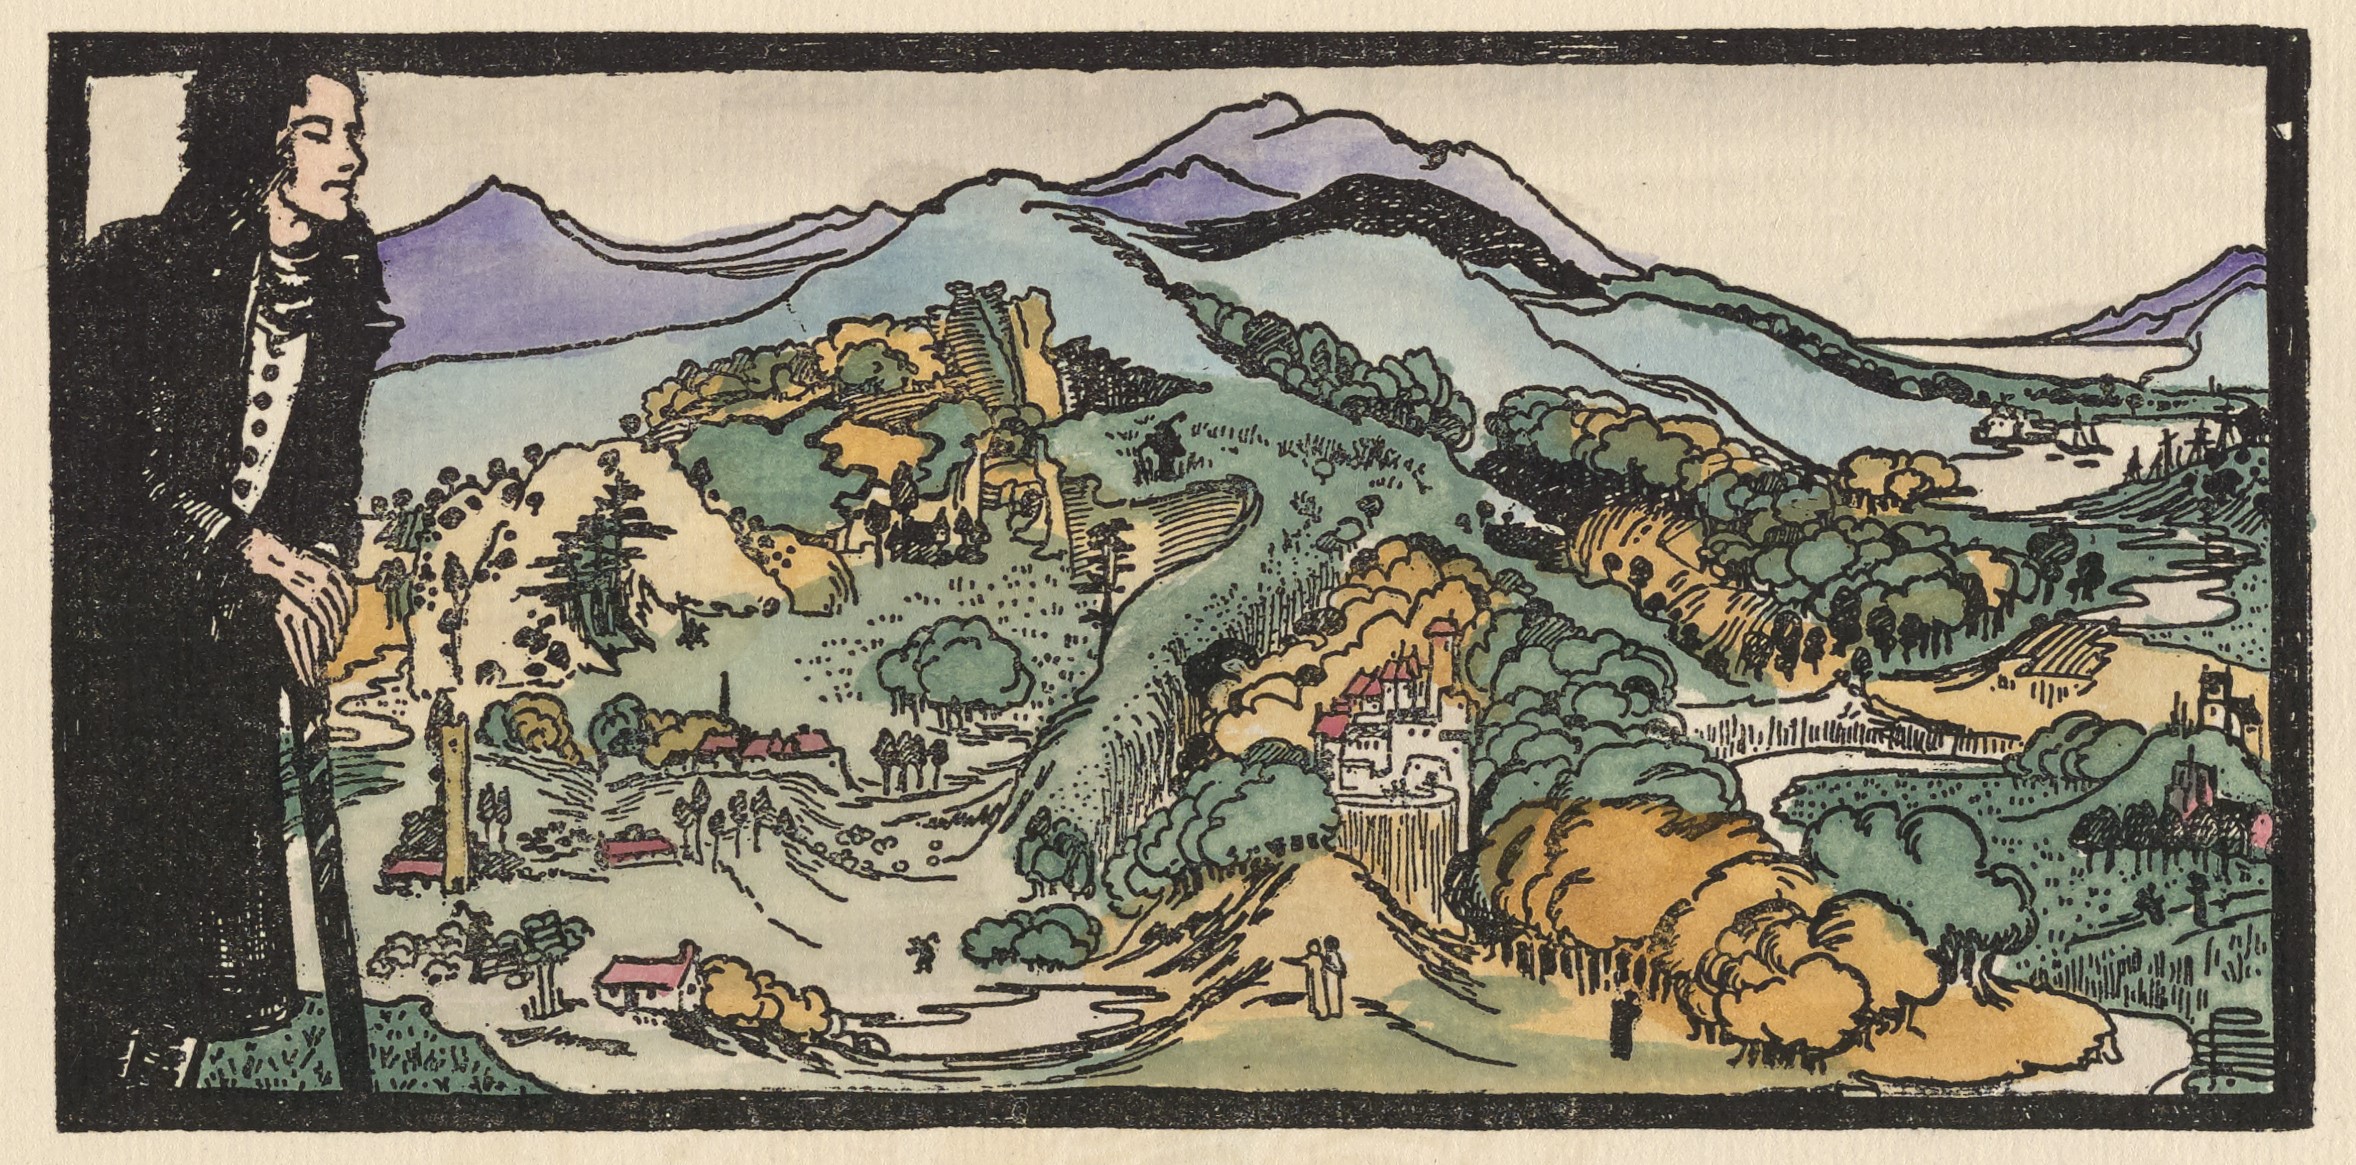 The hand-coloured headpiece illustration features a landscape and is framed in a thick black rectangle. On the left side of the image, a man leans into the frame, depicted in ¾ profile. He wears a long black coat with a white waistcoat visible underneath, and leans on a walking stick, overlooking a hilly landscape below him.. Hills and trees are rendered in shades of green, blue, purple, and ochre, while a white castle and several small farmhouses are topped with red roofs. To the right, a river with sailboats is visible. Small human figures dot the landscape throughout. At the bottom right of the frame is the artist’s monogram.